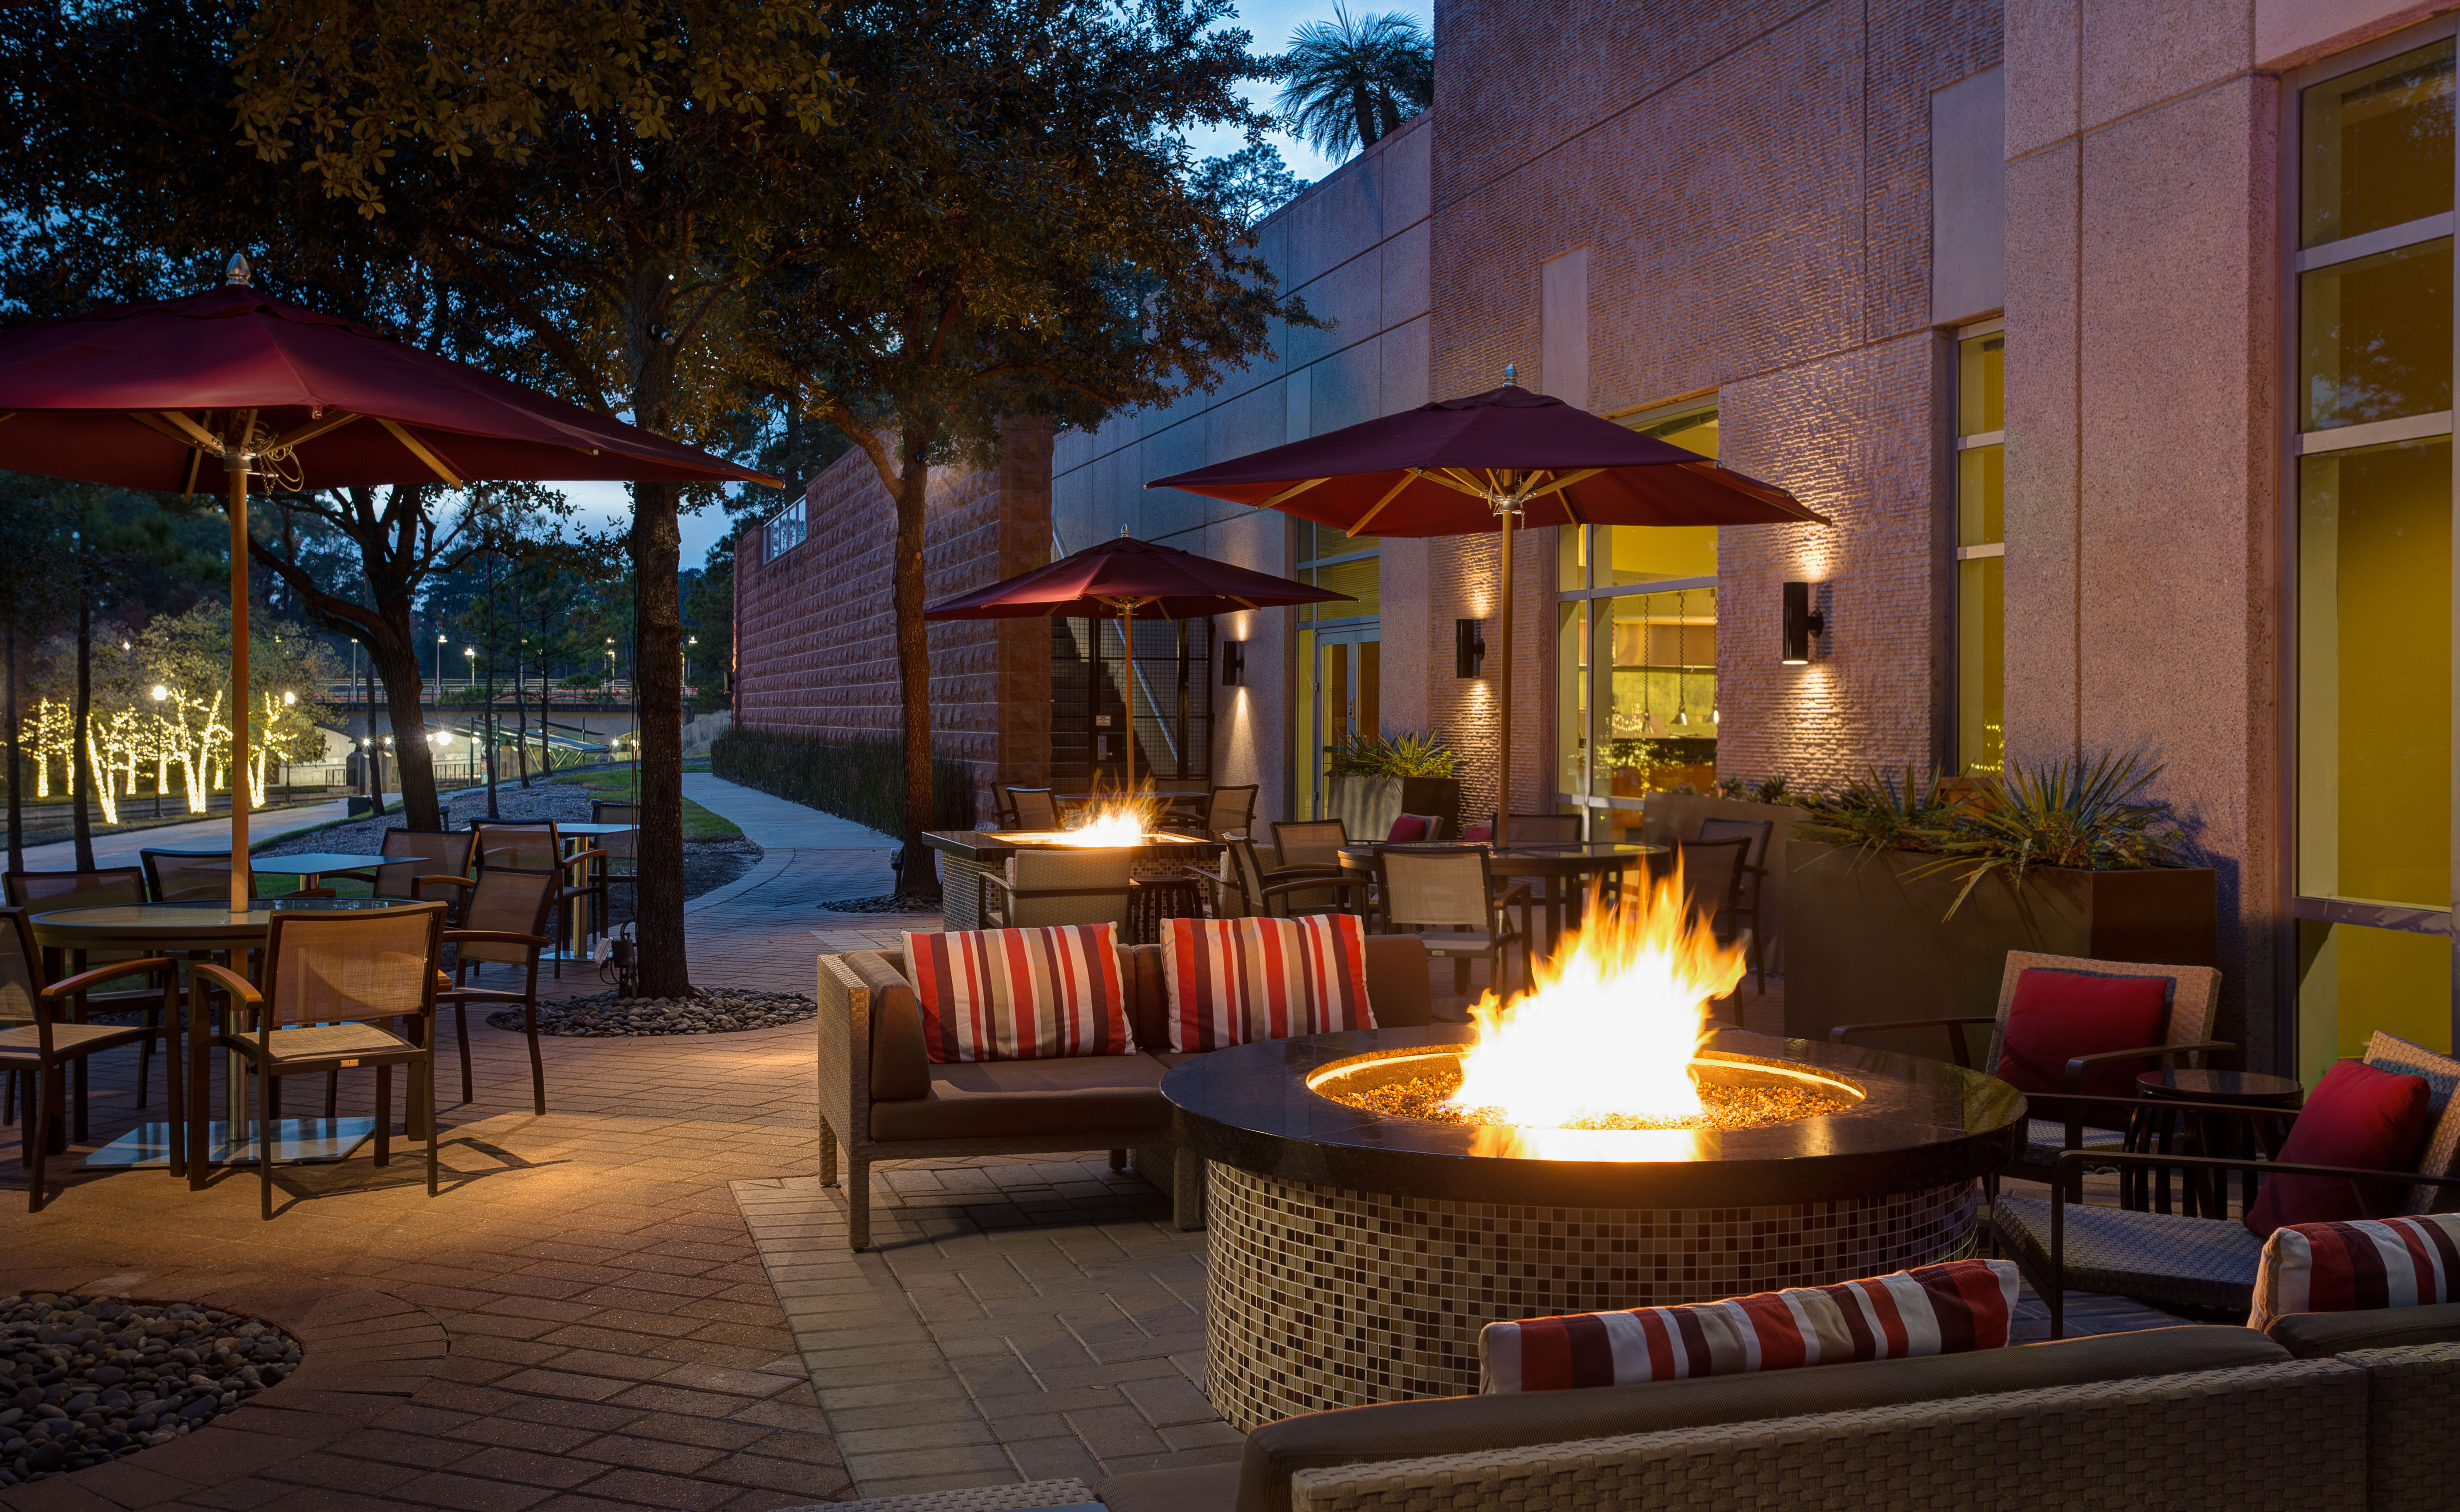 Outdoor firepit at The Woodlands Waterway Marriott hotel, overlooking the trail.